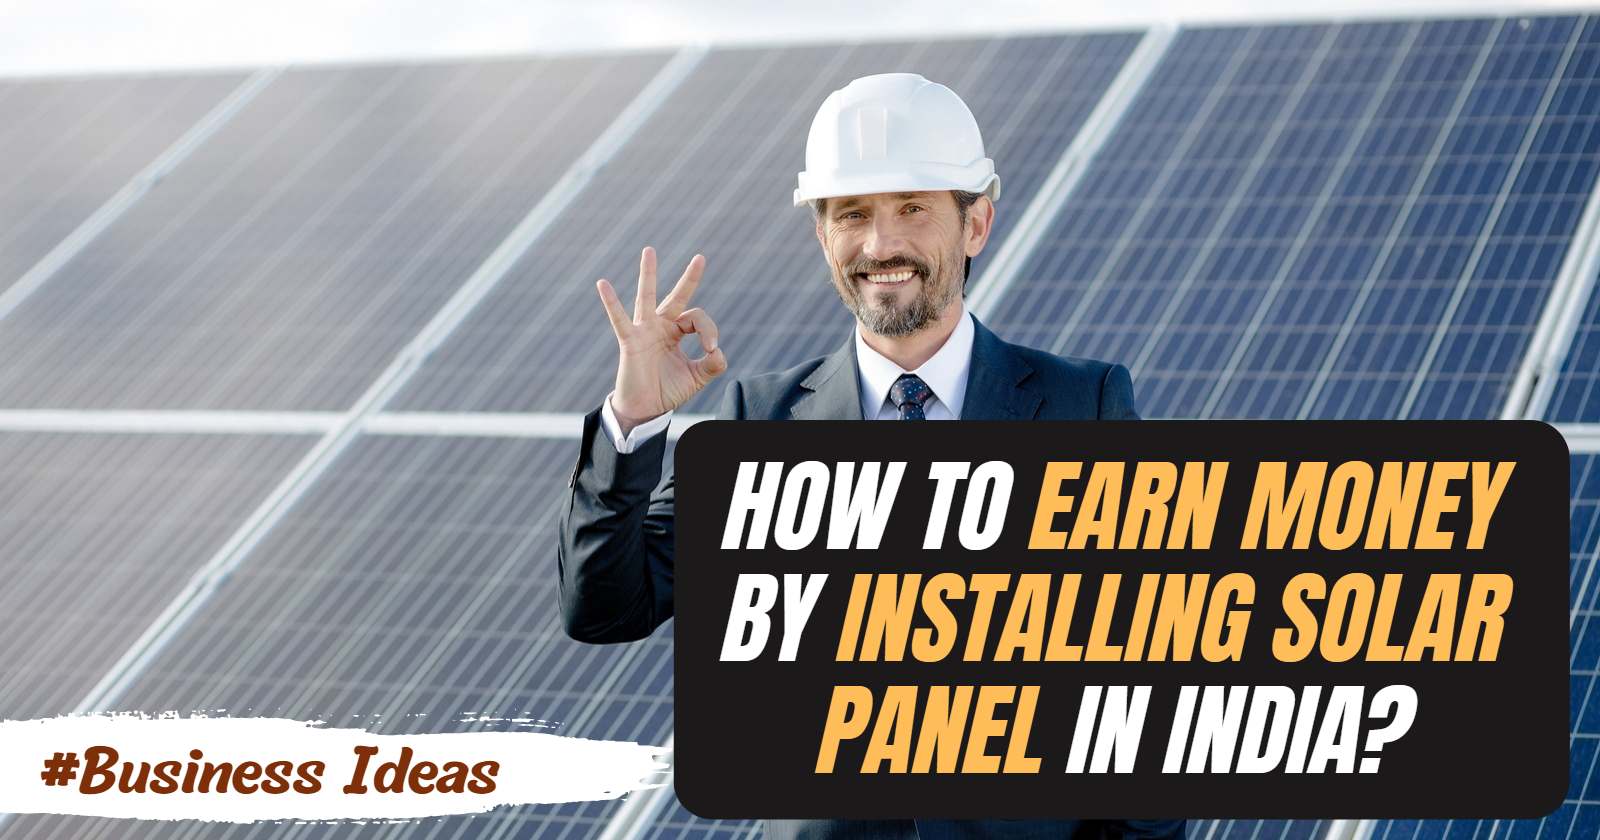 How to earn money by installing Solar Panel in India?- 5 Golden Tips